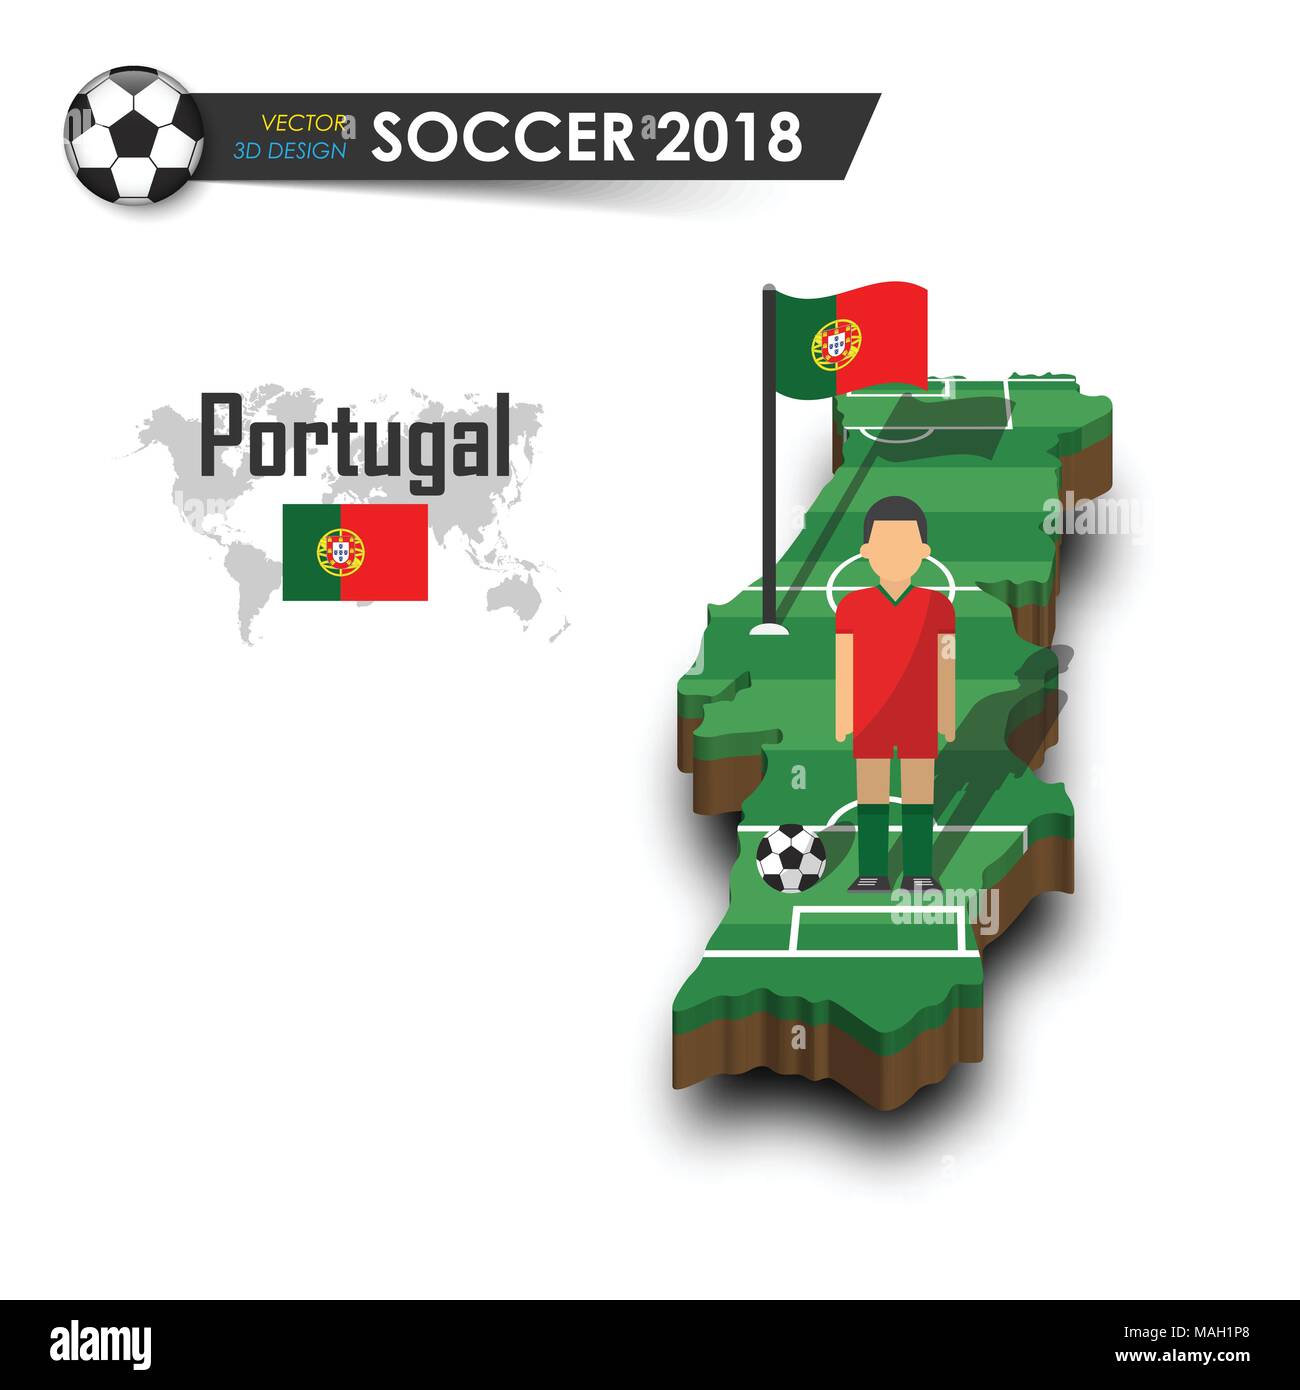 Portugal national soccer team . Football player and flag on 3d design country map . isolated background . Vector for international world championship  Stock Vector